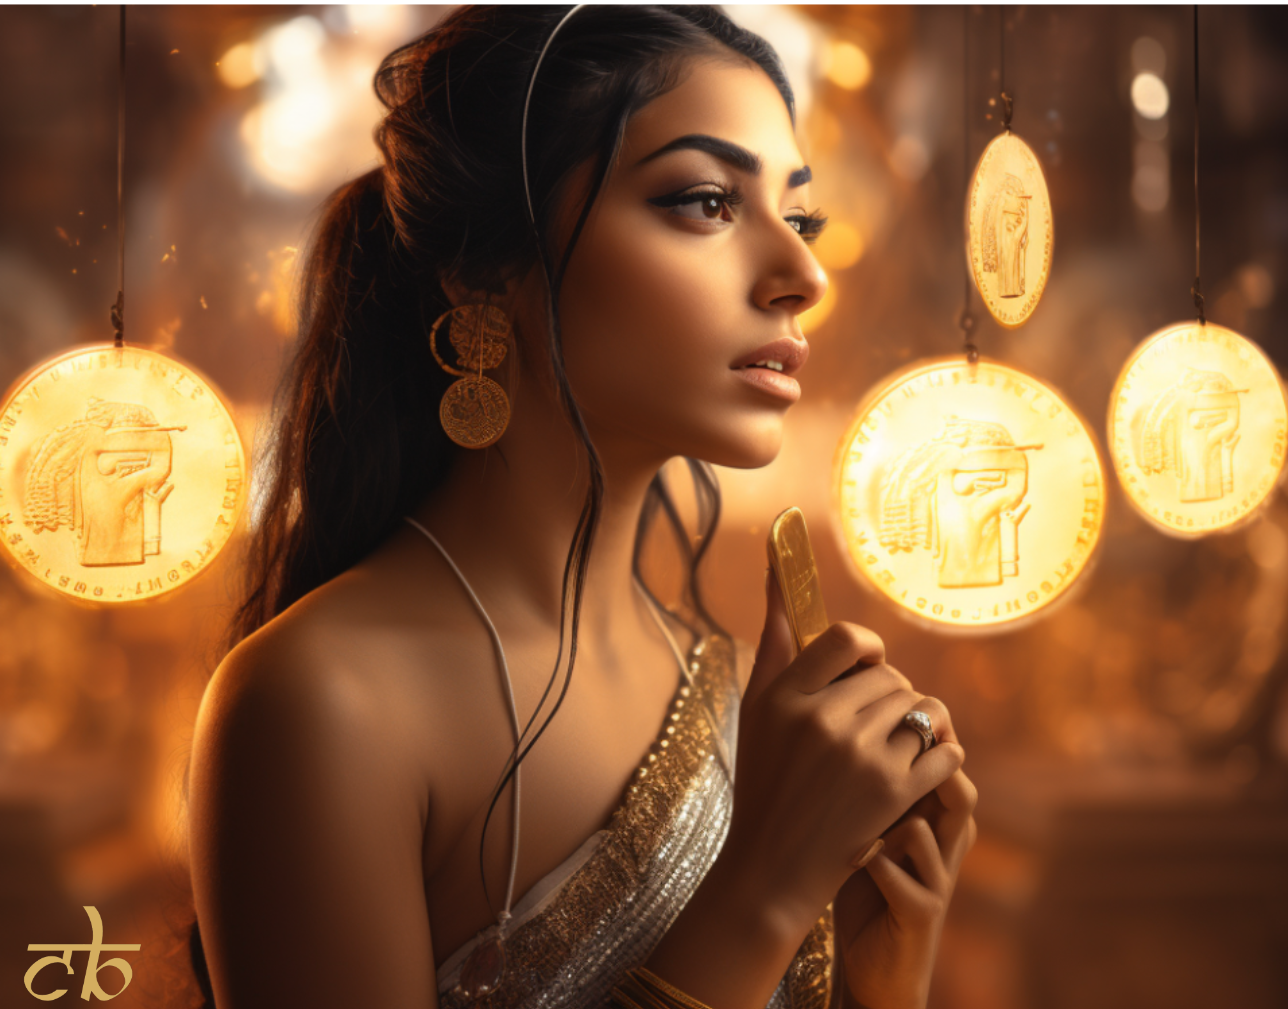 CoinBharat artistic rendering of an Indian woman burning crypto tokens, version 2